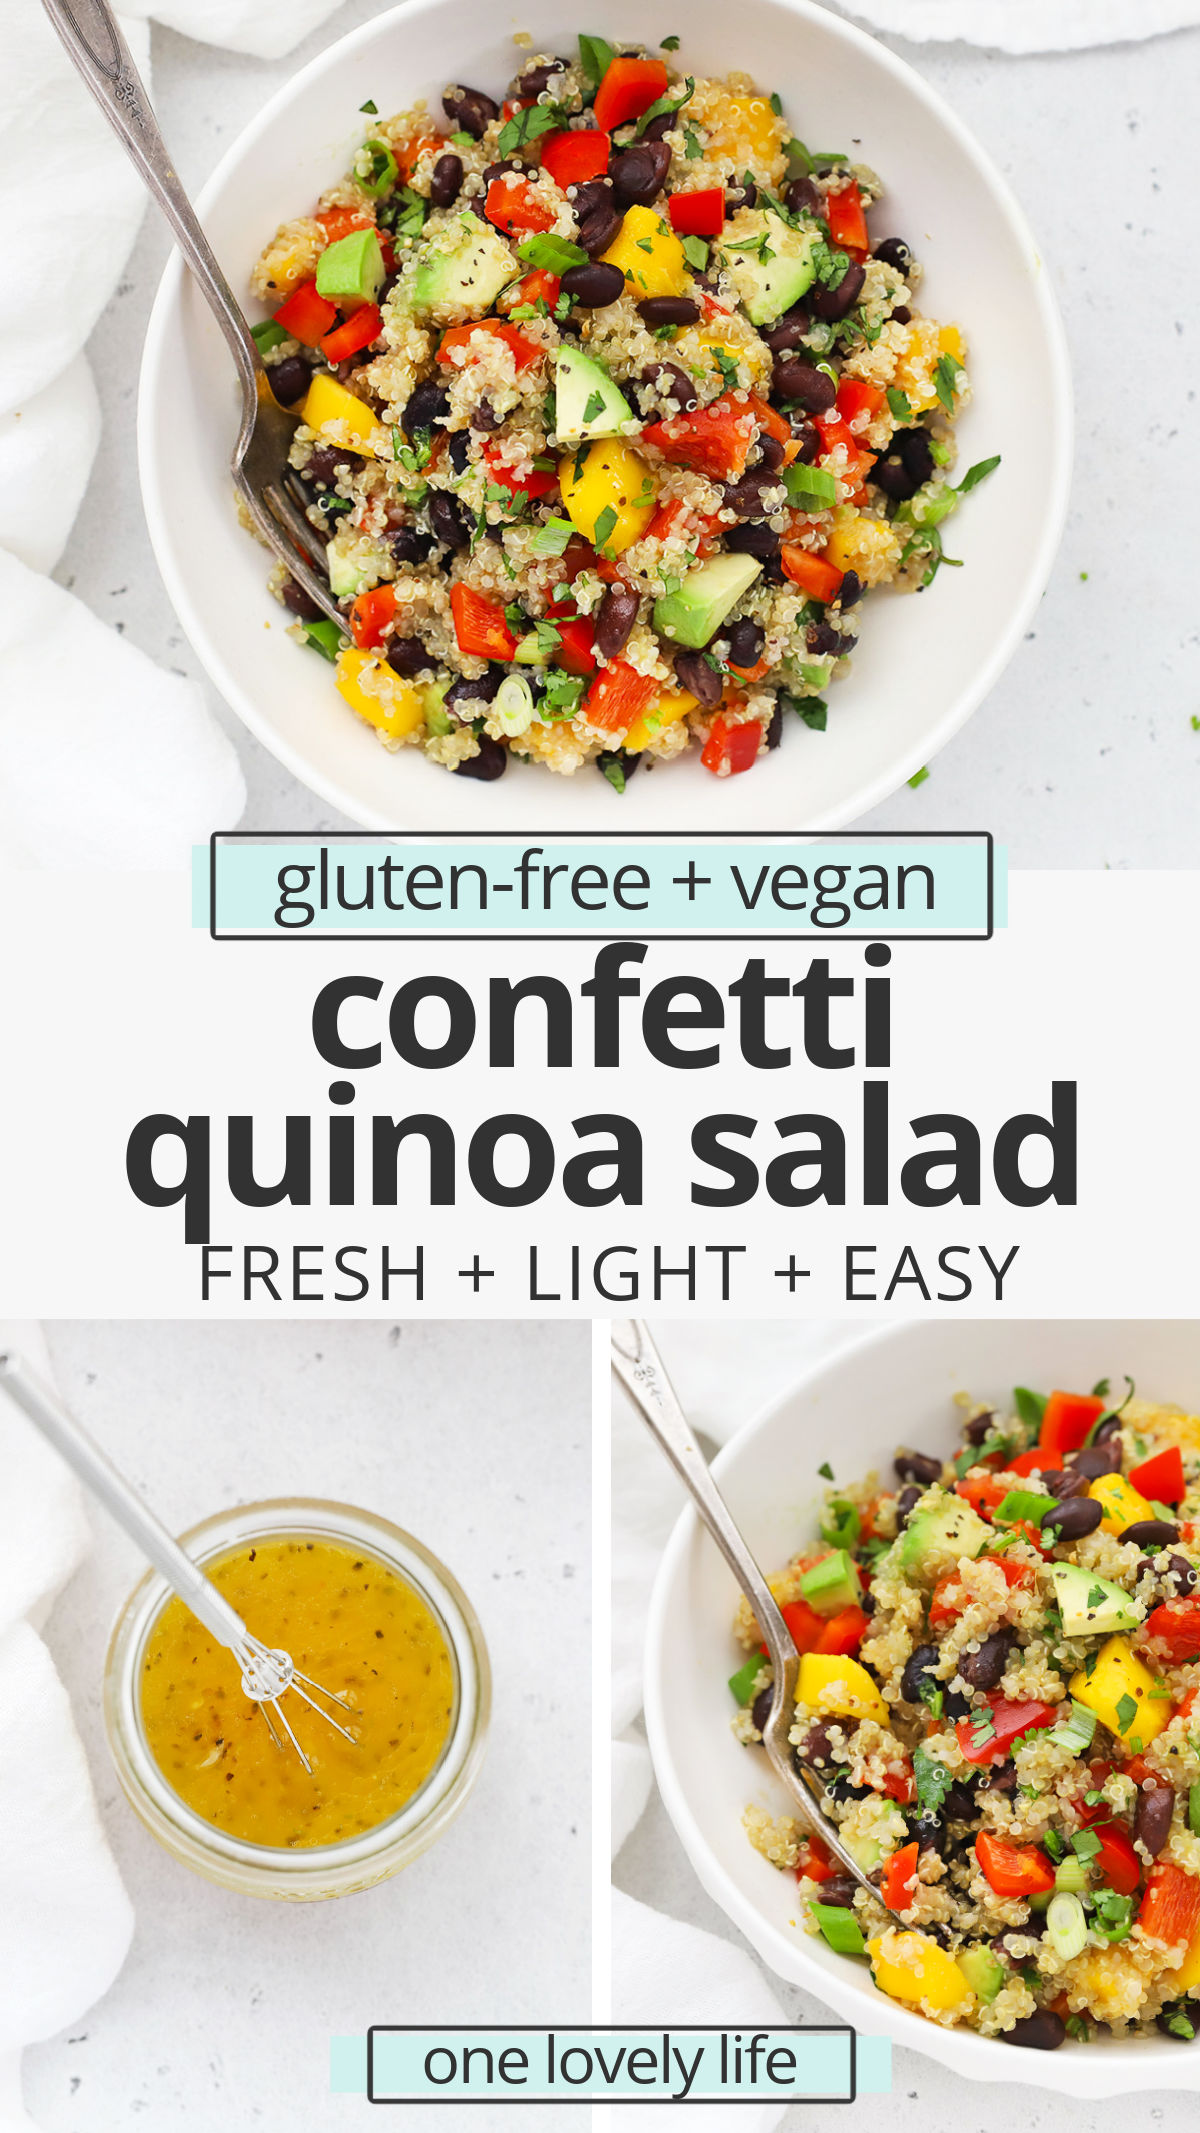 Confetti Quinoa Salad with Lime Dressing- One of my family's all time favorite recipes, this colorful healthy quinoa salad is perfect for picnics, potlucks, barbecues, lunches, meal prep, and more! (Gluten-Free, Vegan) // Healthy Quinoa Salad Recipe // Tex-Mex Quinoa Salad #quinoasalad #glutenfree #vegan #salad